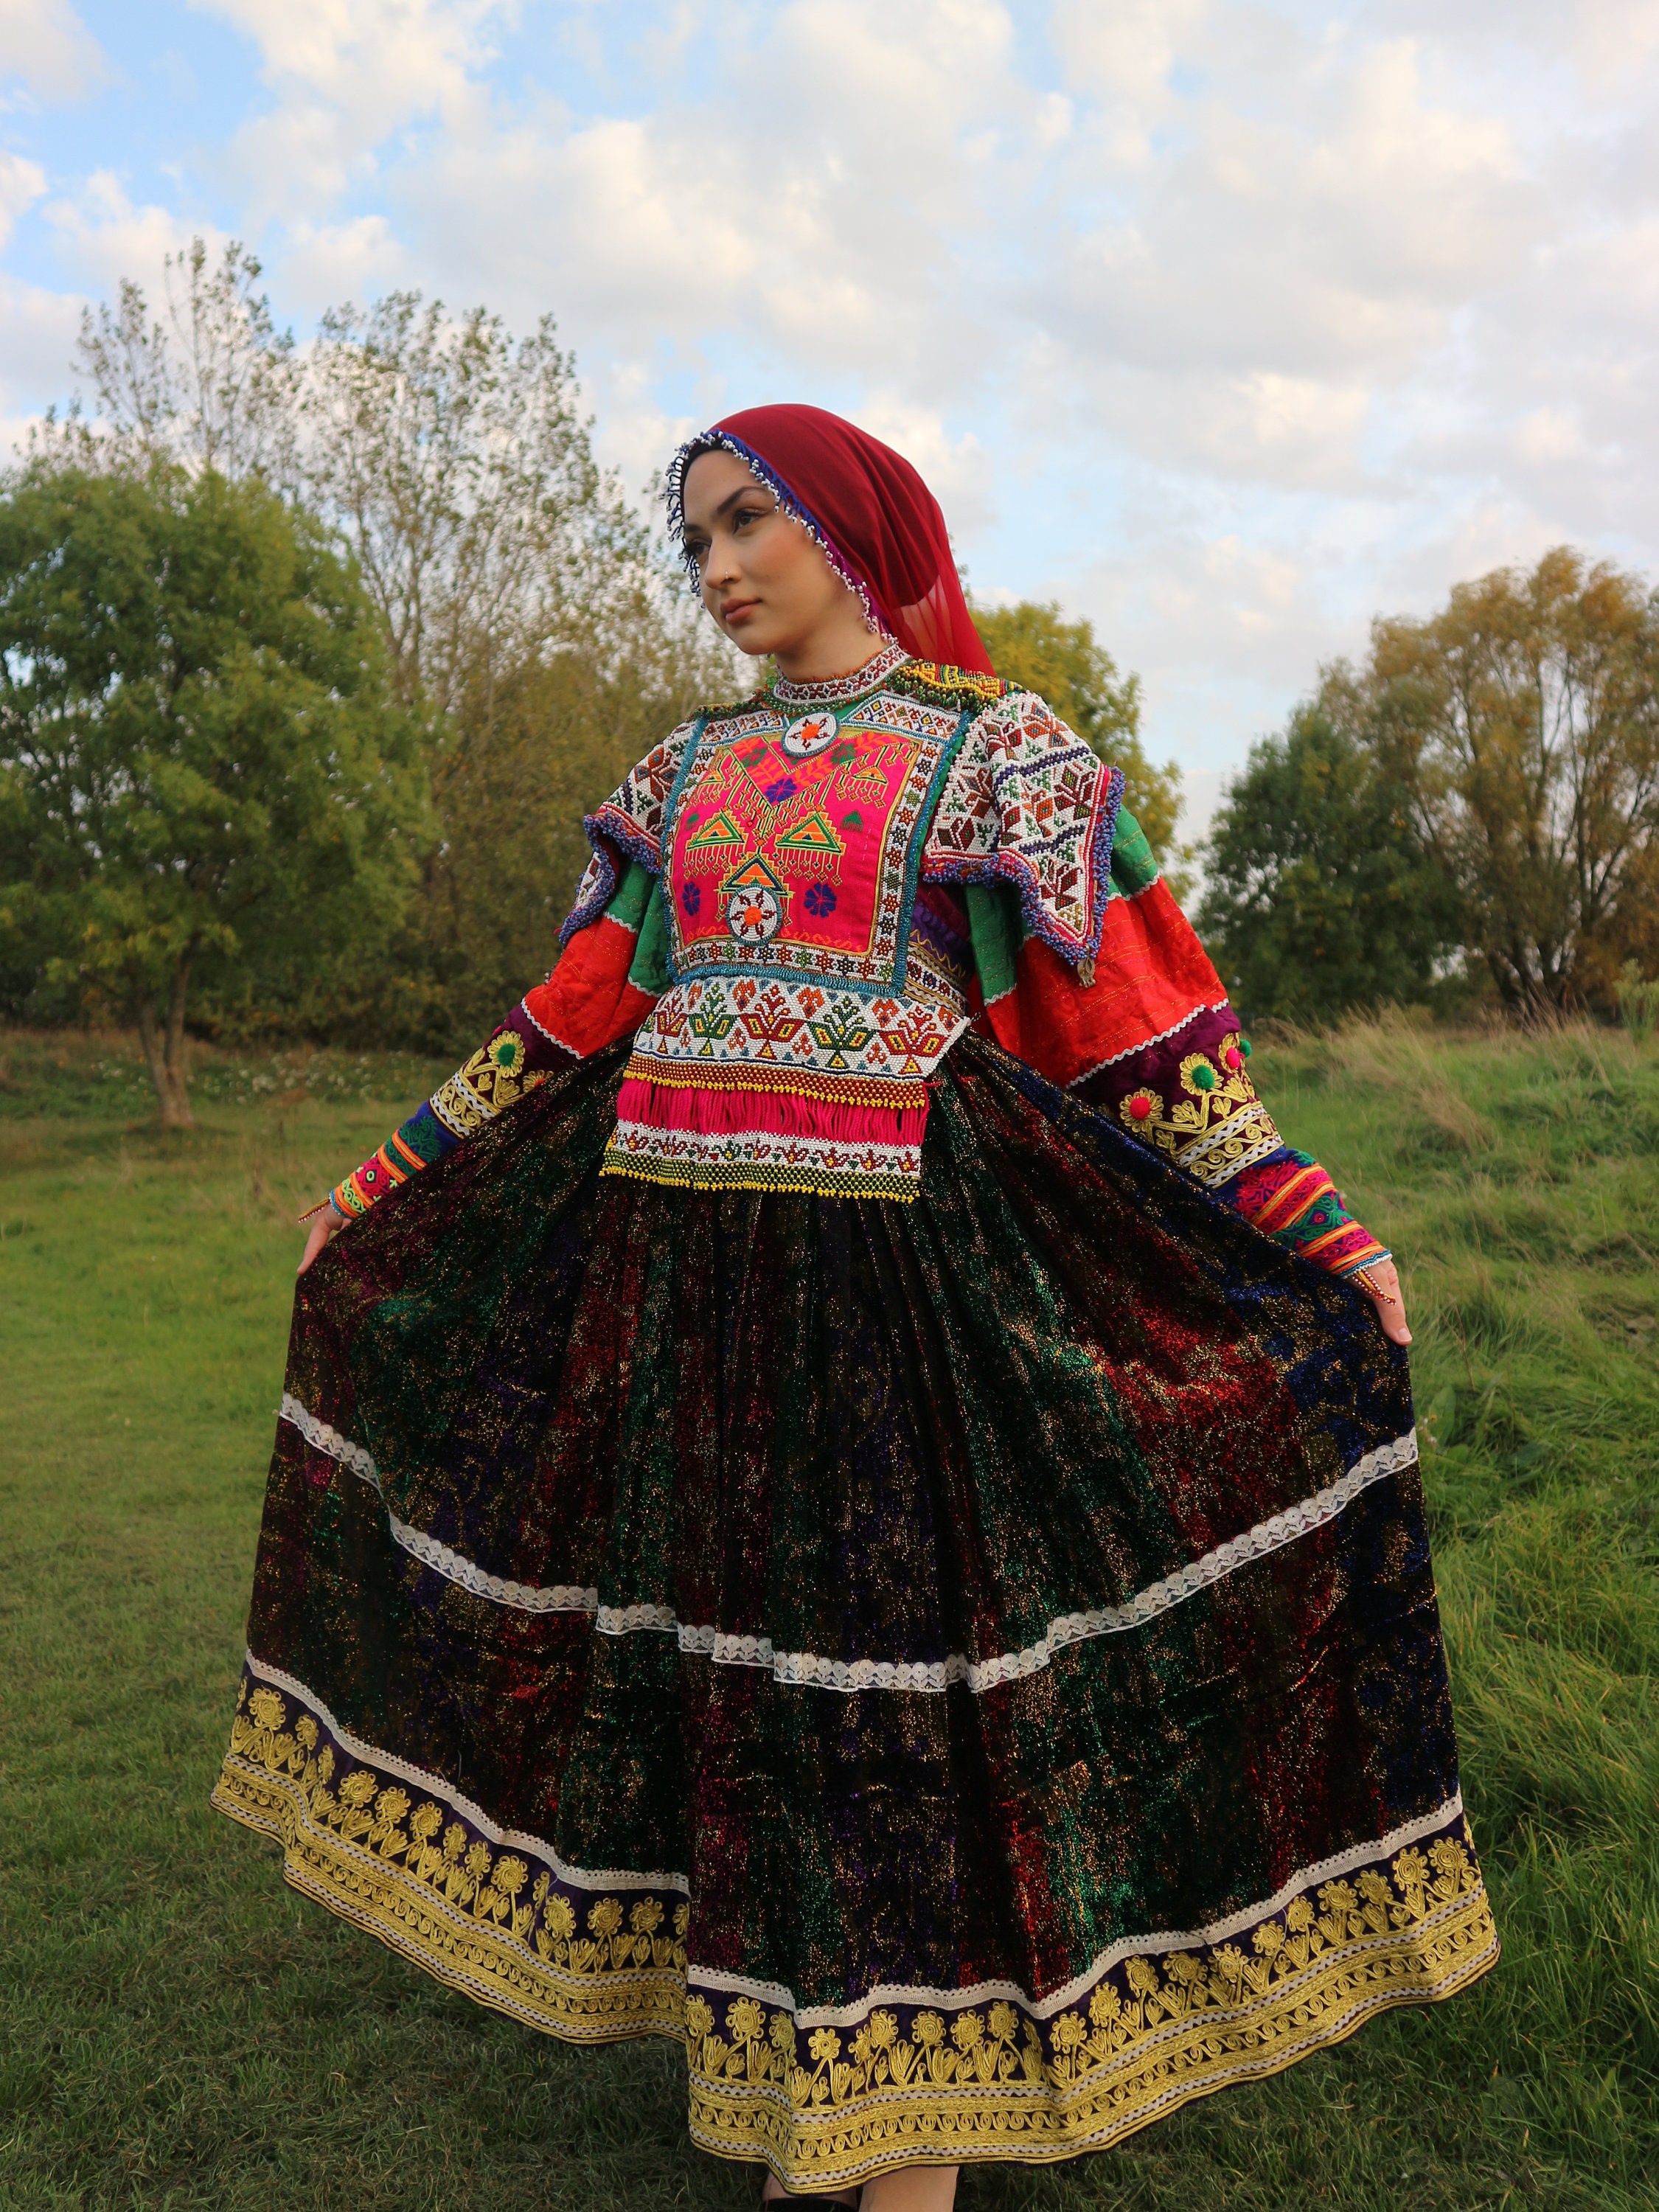 How One Afghan Woman Is Embracing Her Traditional Dress